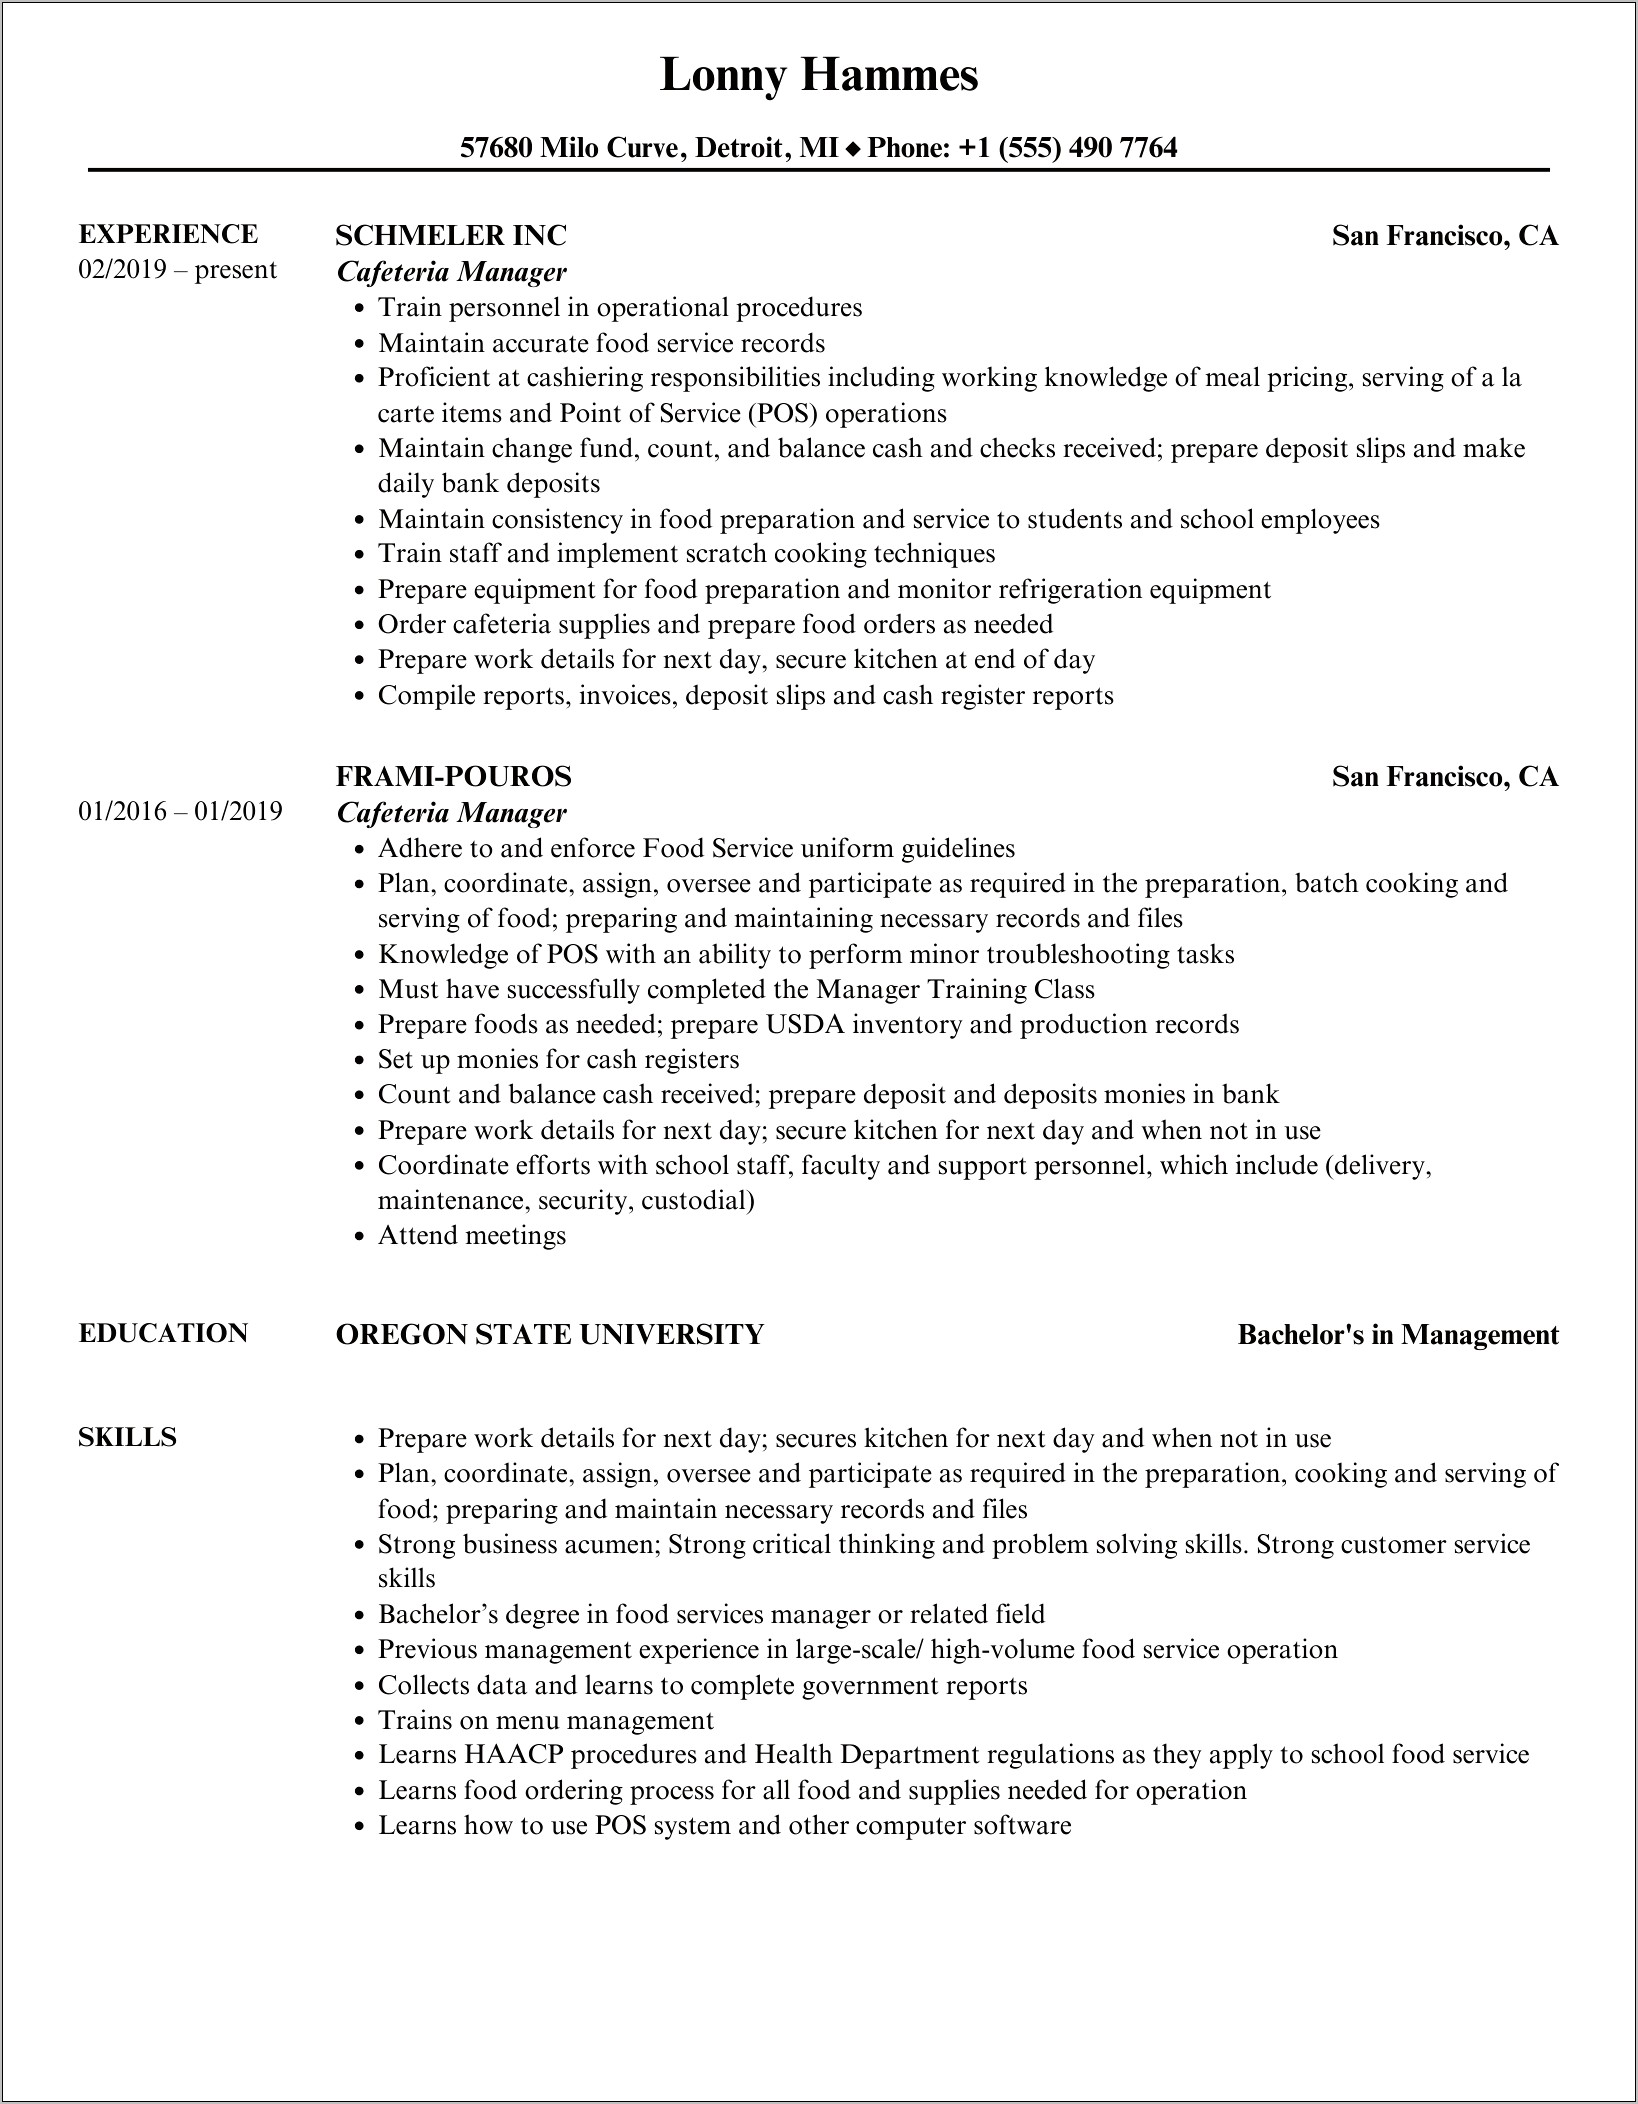 Resume For School Cafeteria Manager